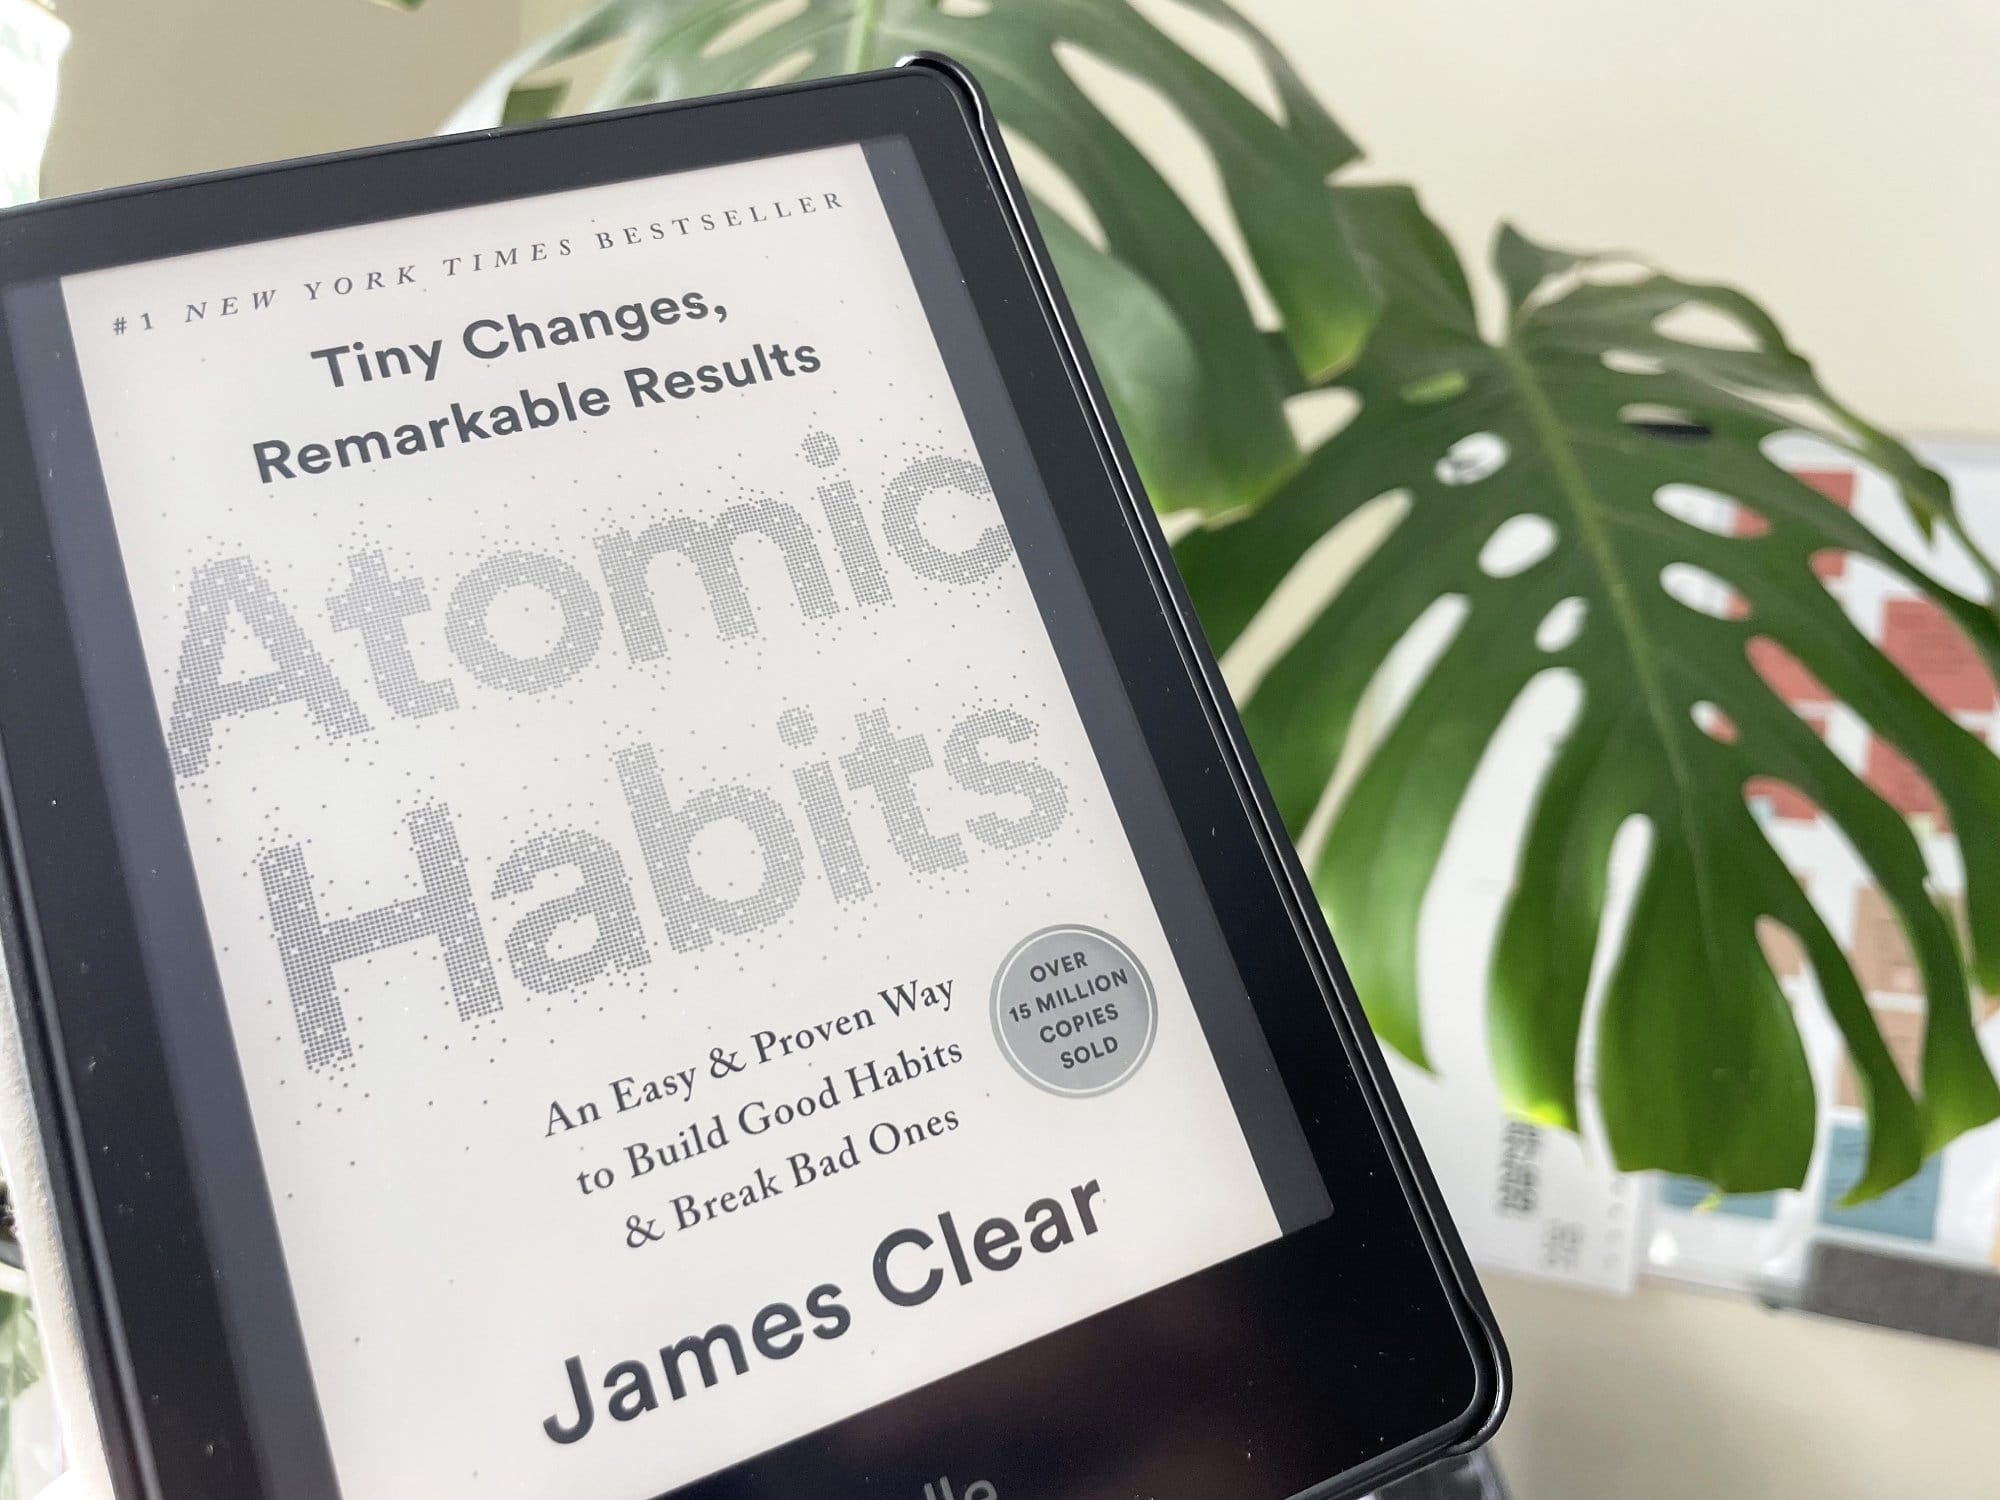 An e-reader displaying the cover of “Atomic Habits” by James Clear, with a large monstera leaf in the background